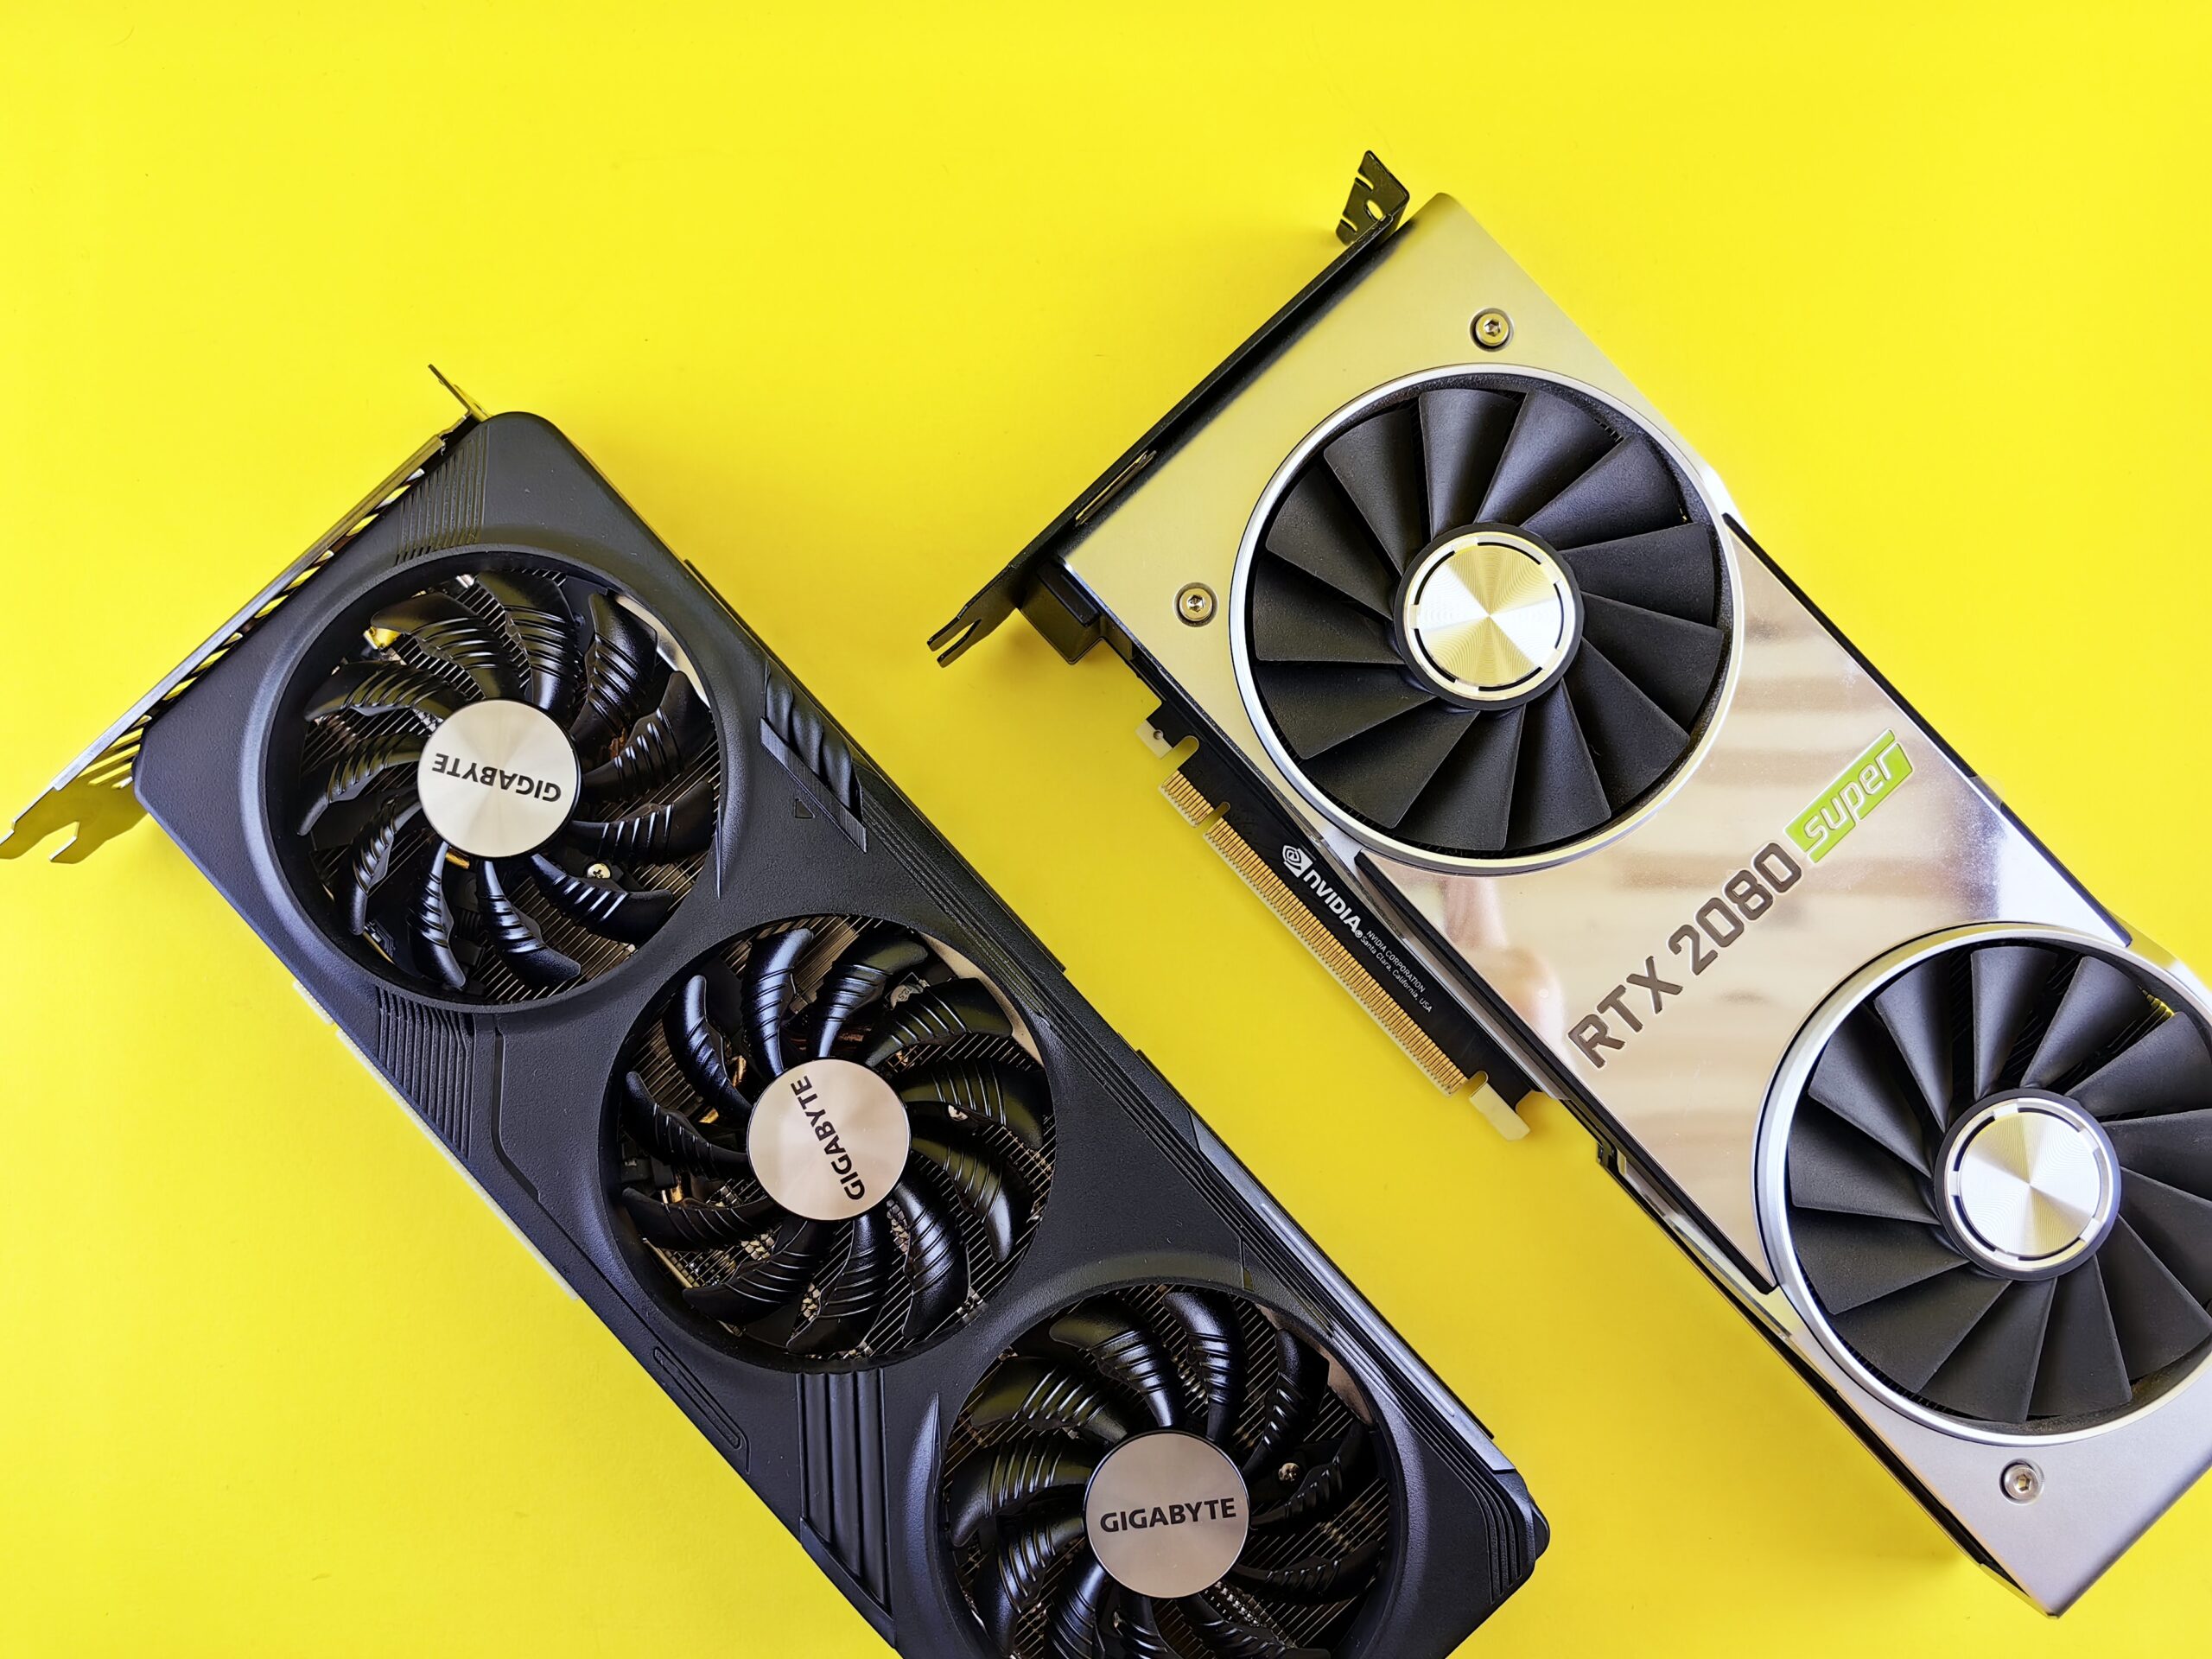 Exploring the NVIDIA GeForce GTX 1080 Mobile: Power